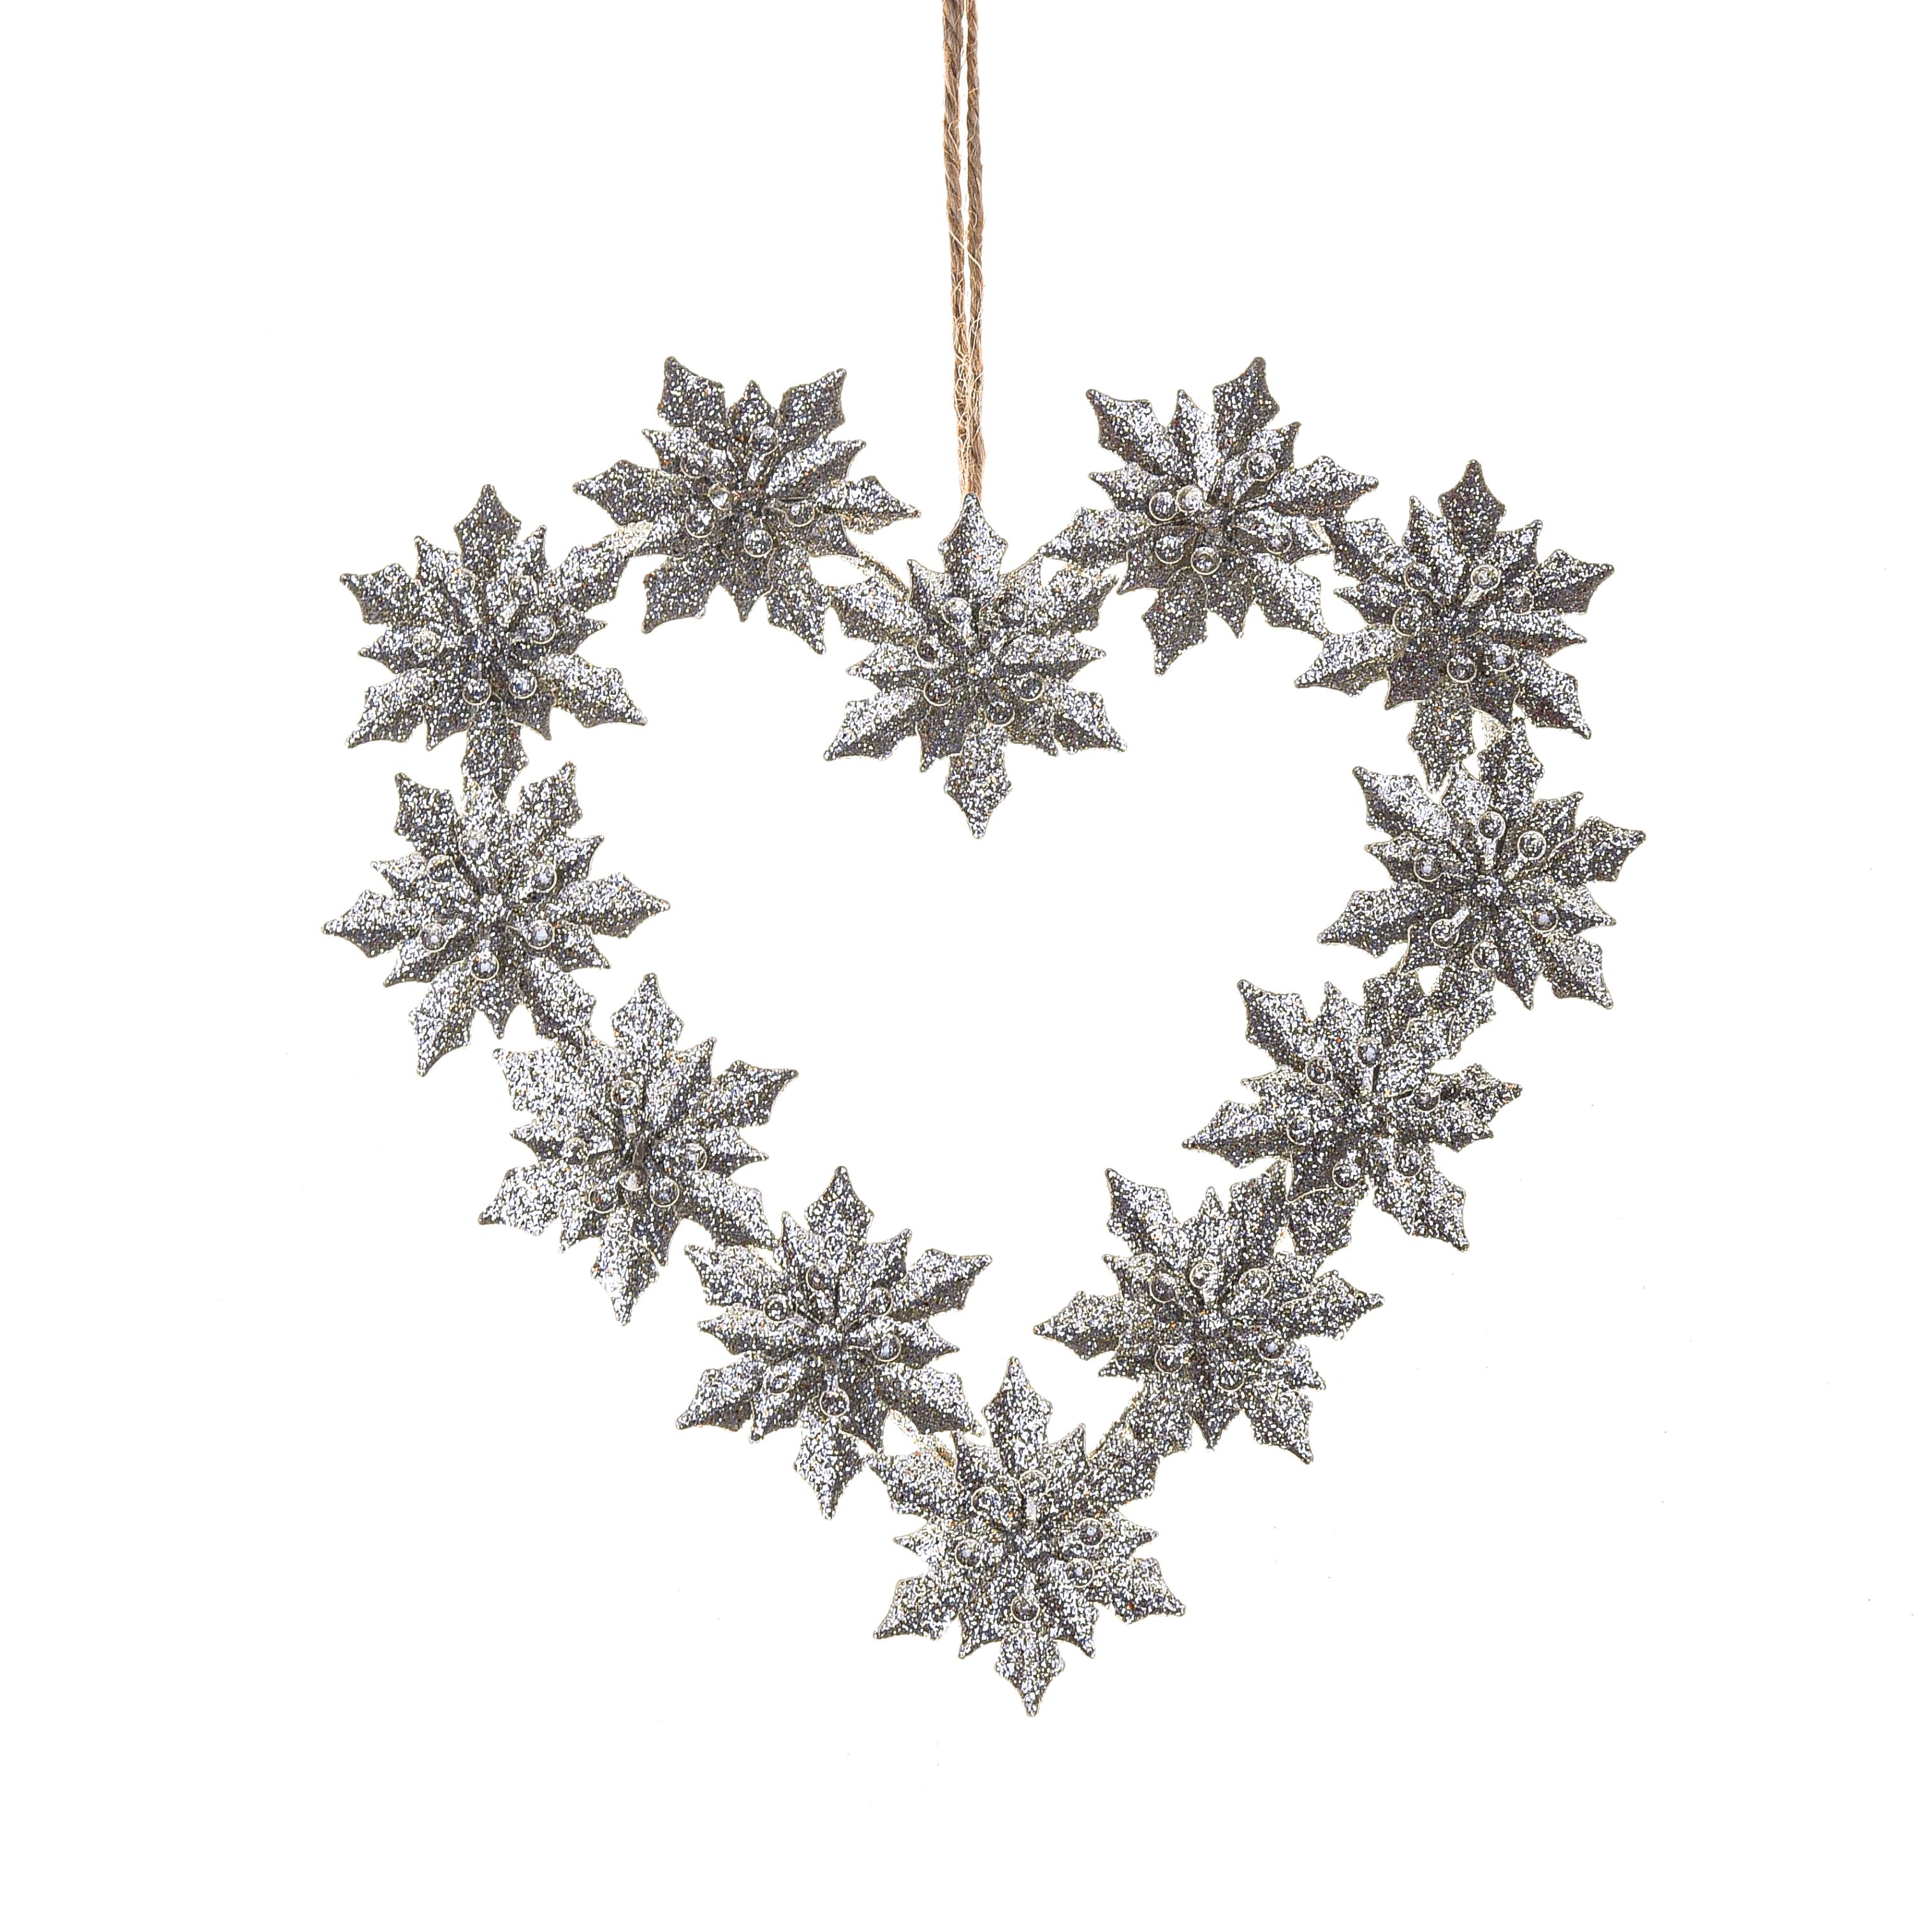 CHRISTMAS ITEMS,CUORE 15 CM IN METALLO C/STELLE